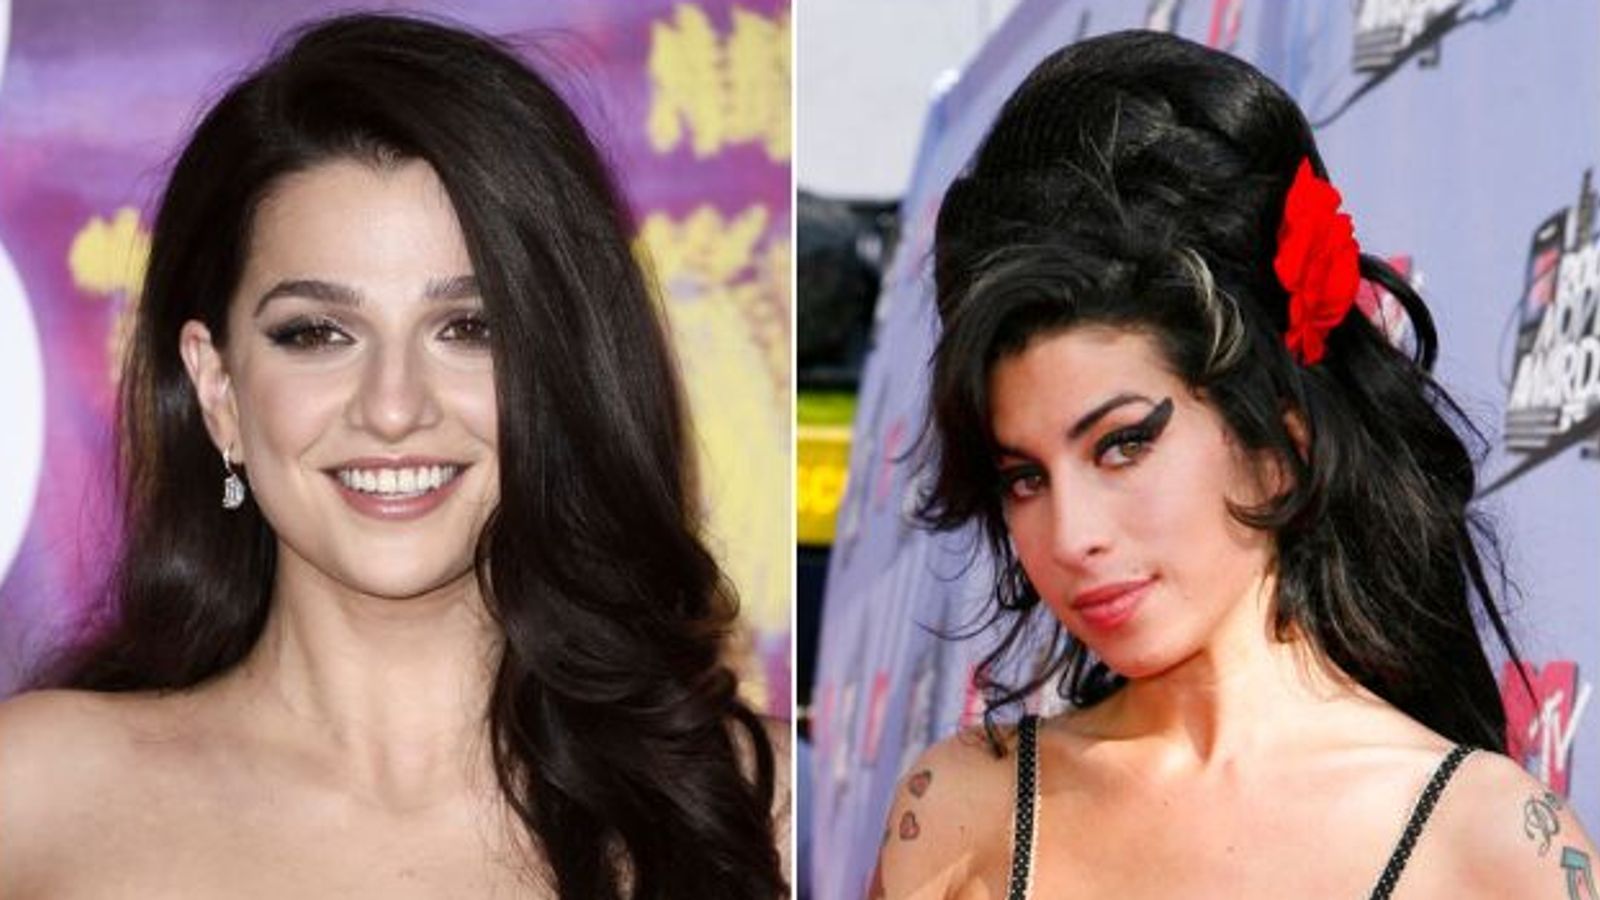 'Feeling frailer and smaller' helped Amy Winehouse actress portray singer